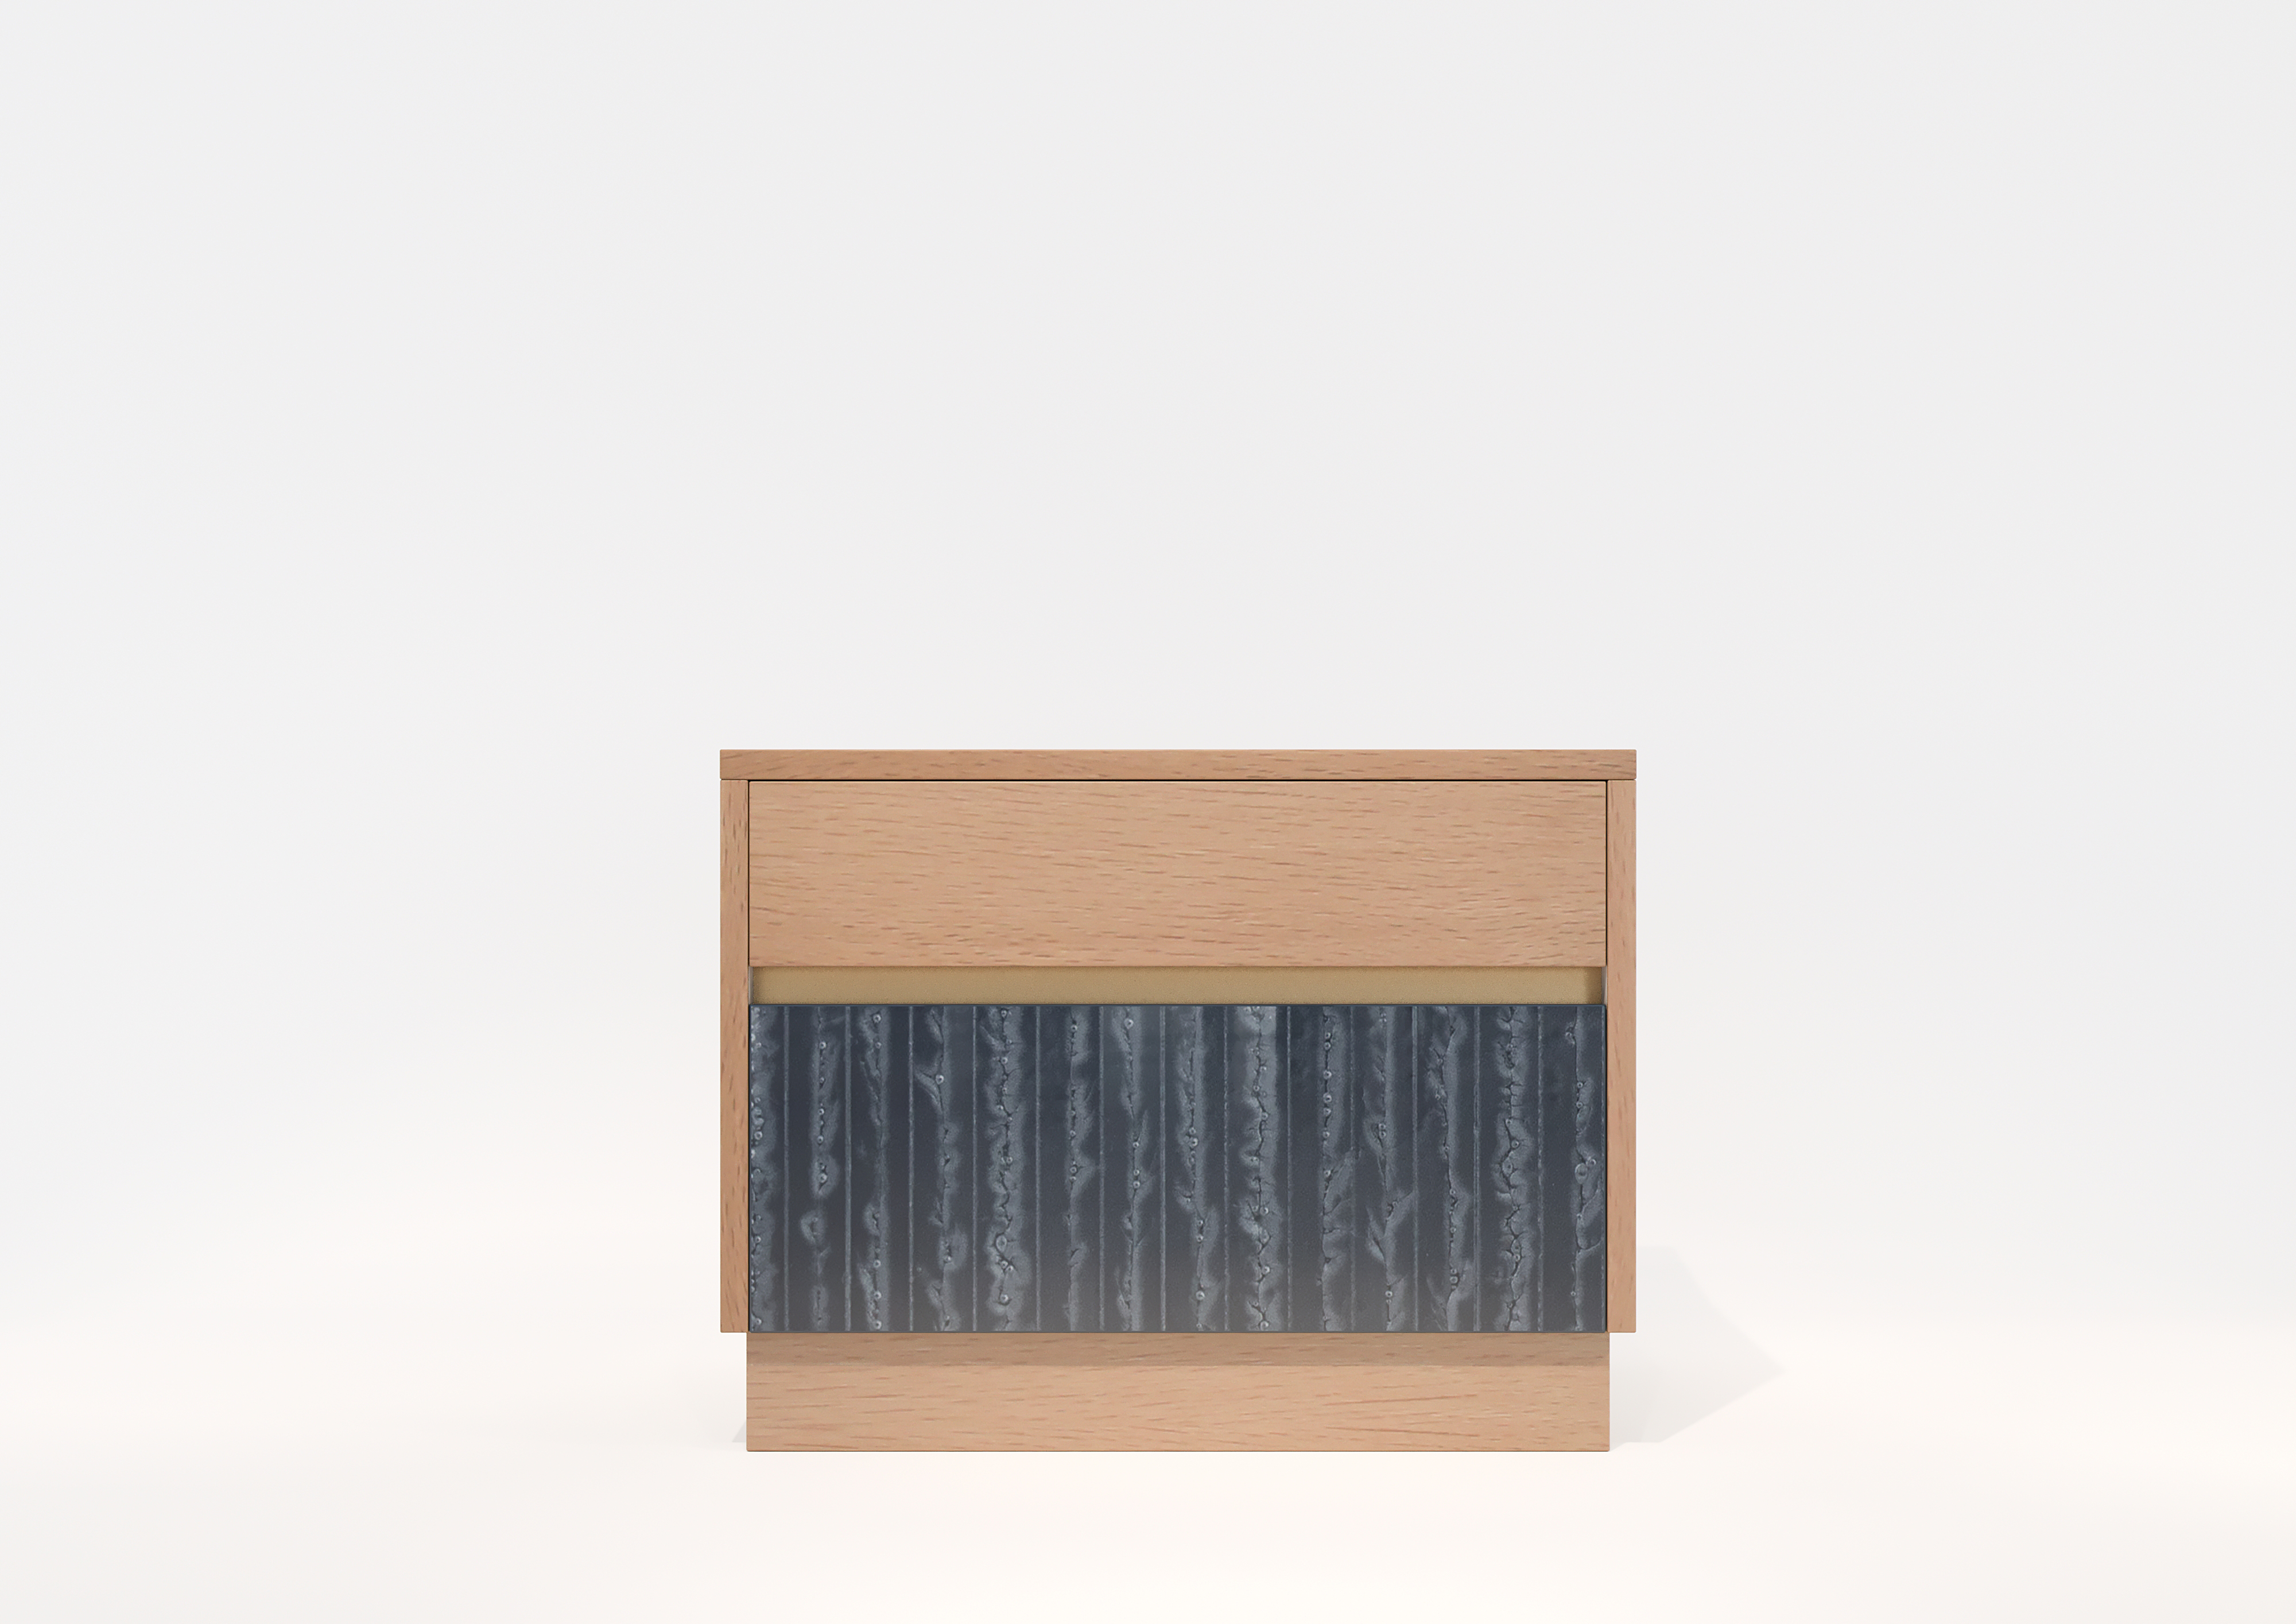 Downing Nightstand V2 Wood Edition #03 – $3,255.00